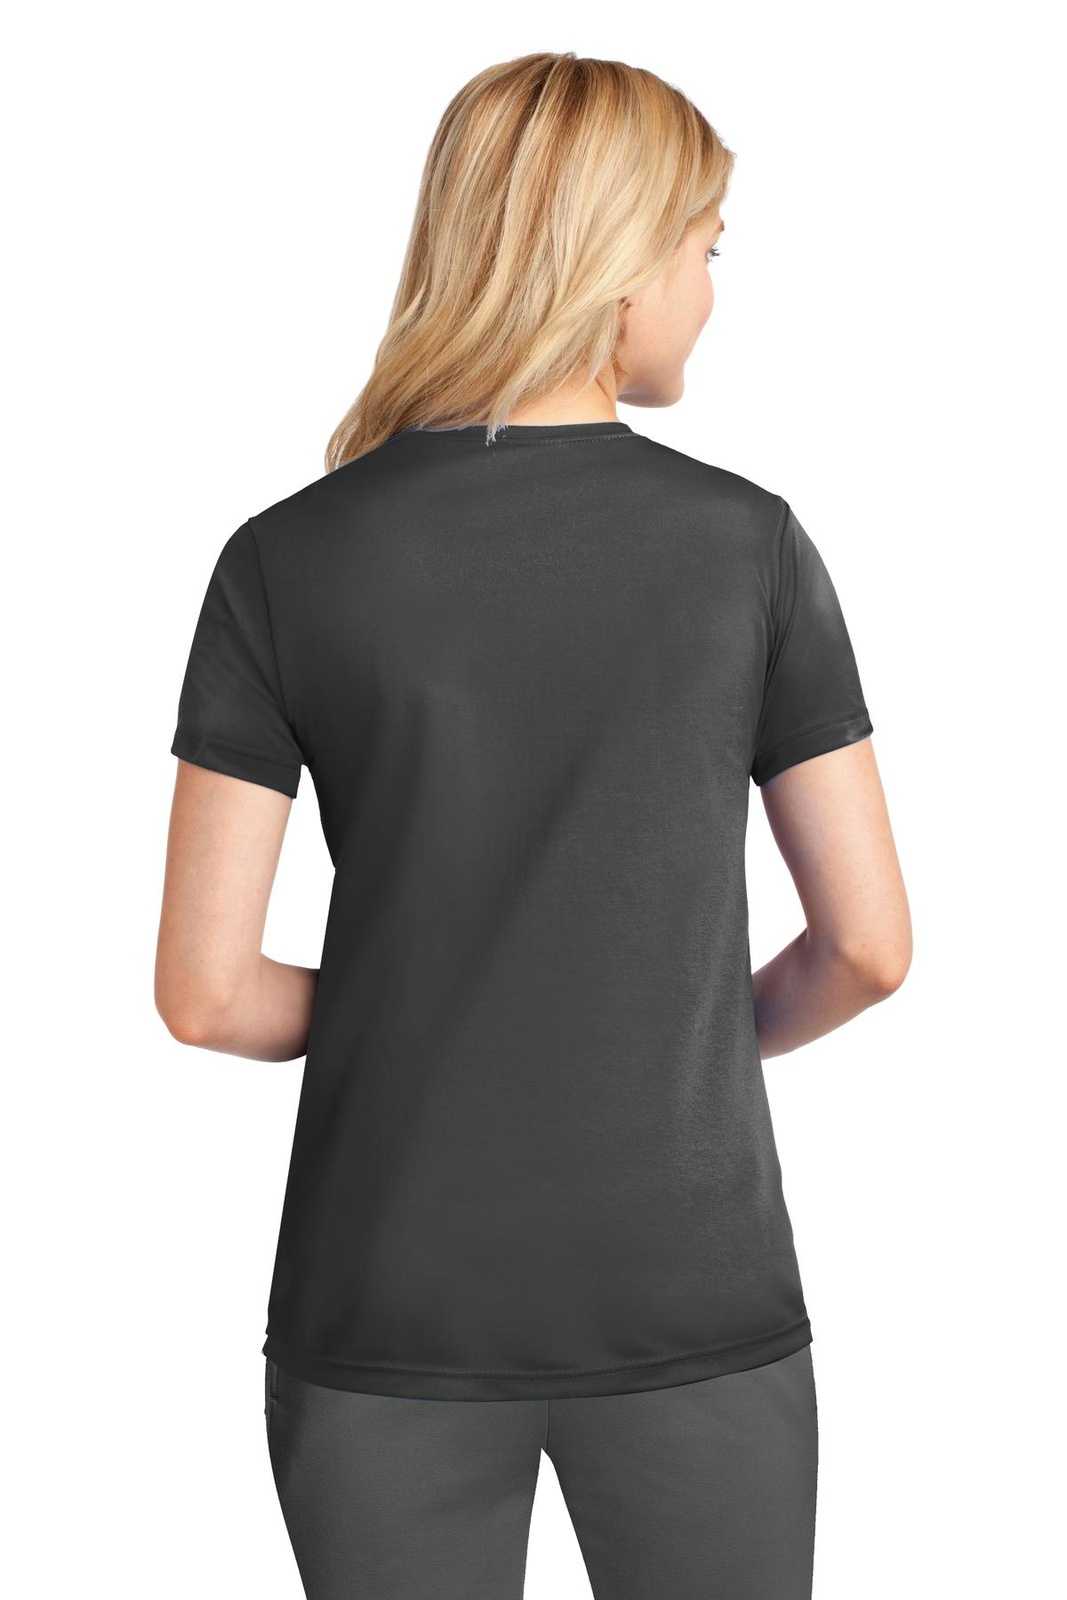 Port &amp; Company LPC380 Ladies Performance Tee - Charcoal - HIT a Double - 2